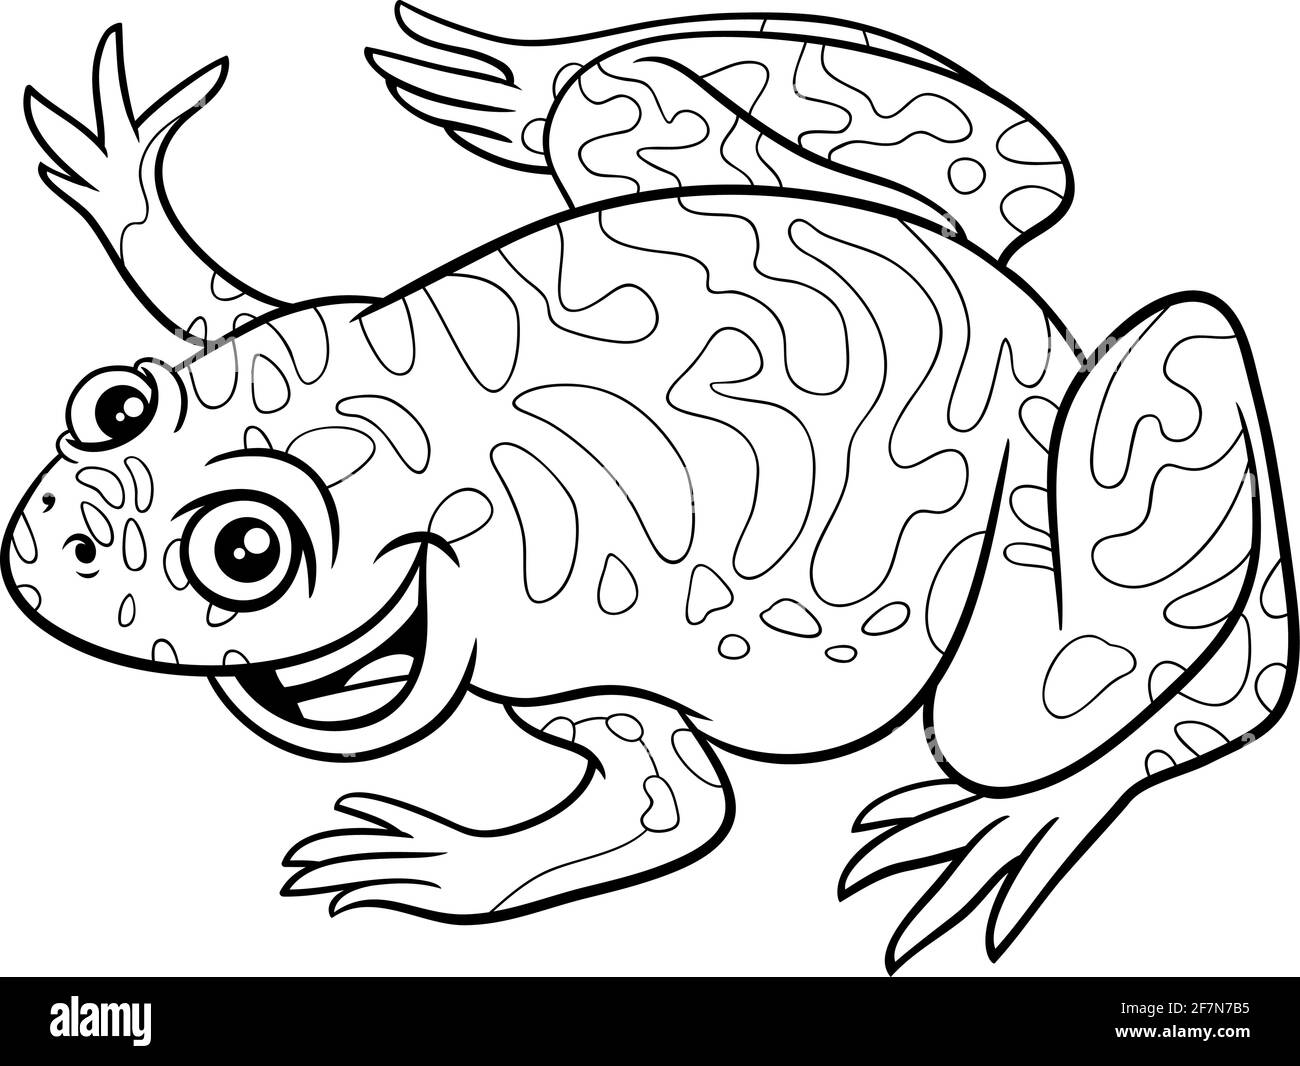 Black and white cartoon illustration of xenopus comic animal character coloring book page Stock Vector